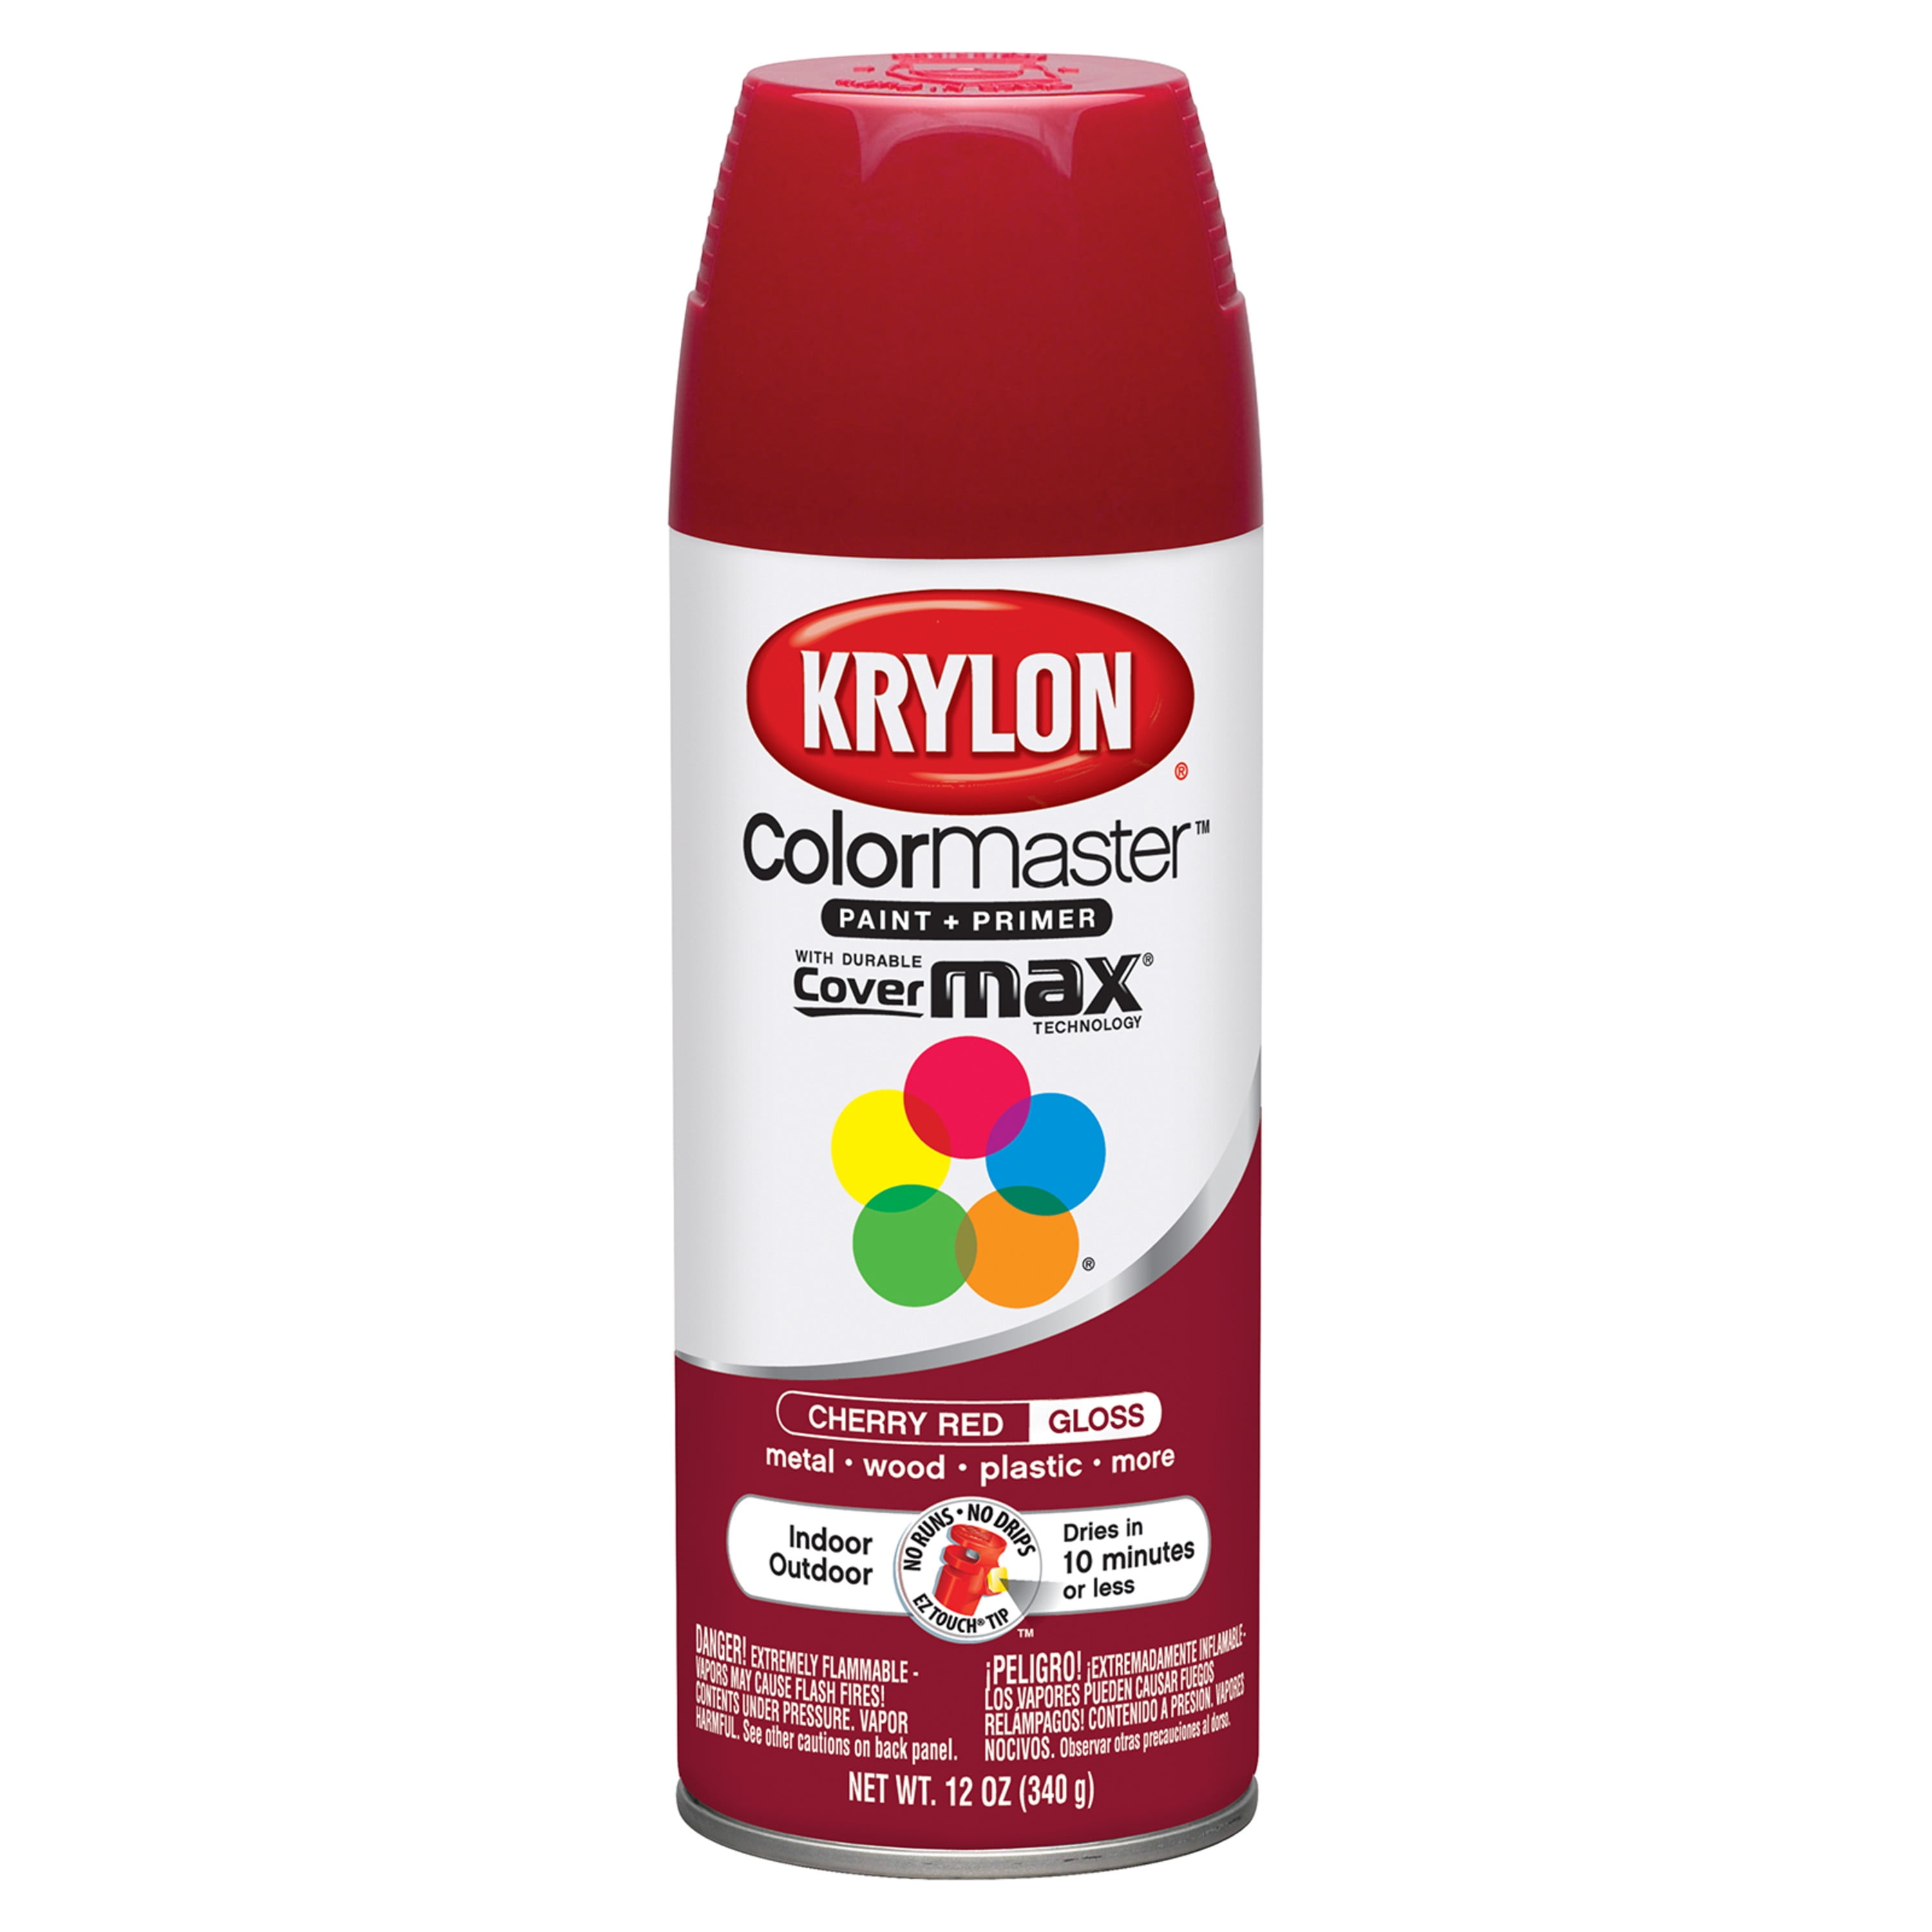 Krylon Colormaster Paint And Primer Spray Paint 12 Oz Cherry Red